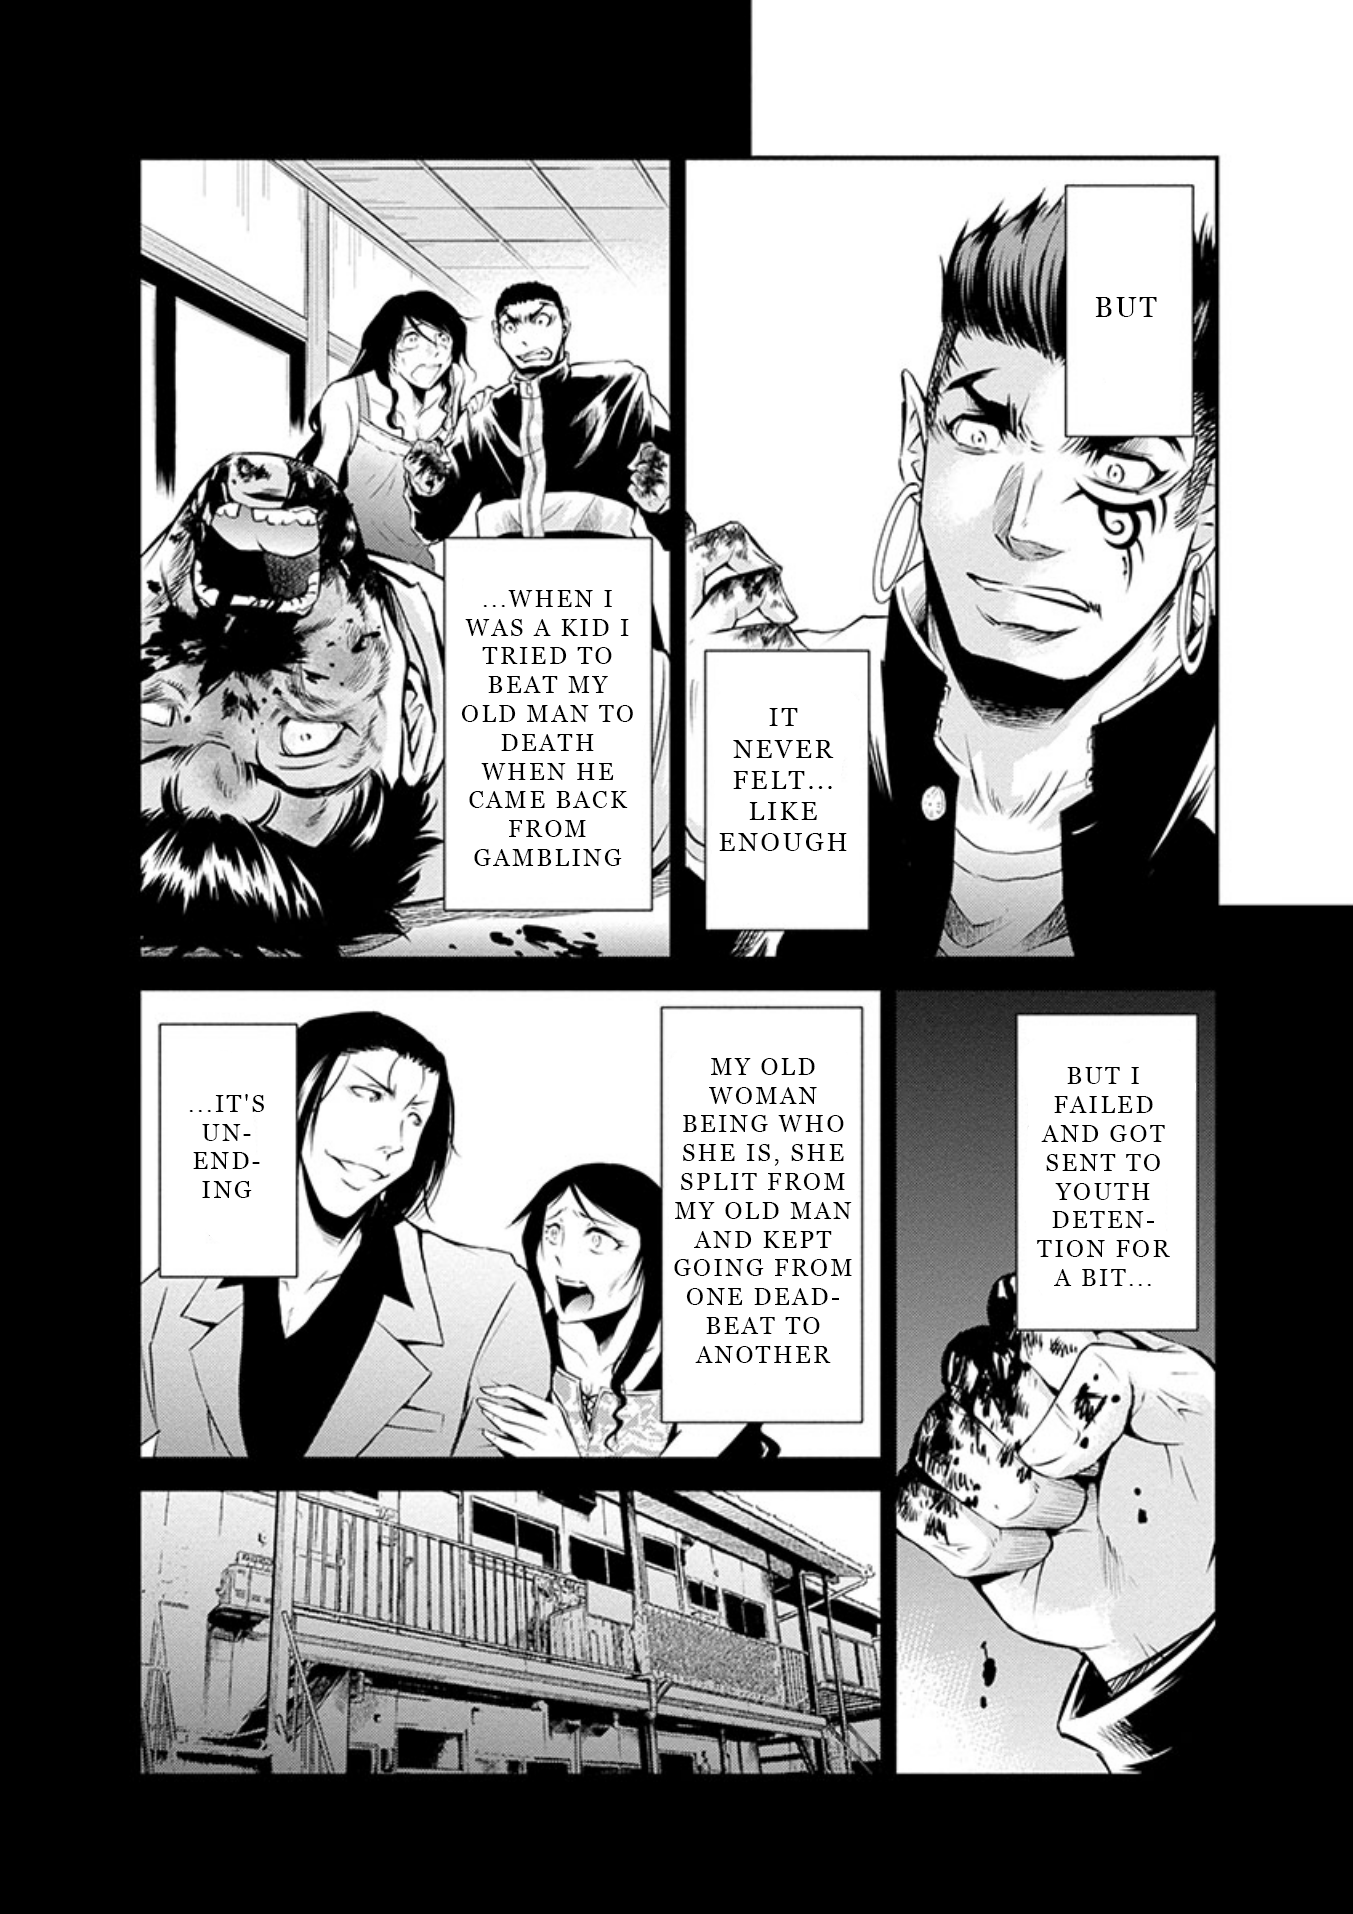 Life Game Vol.3 Chapter 18.5: Special Extra - The Very End - Picture 3